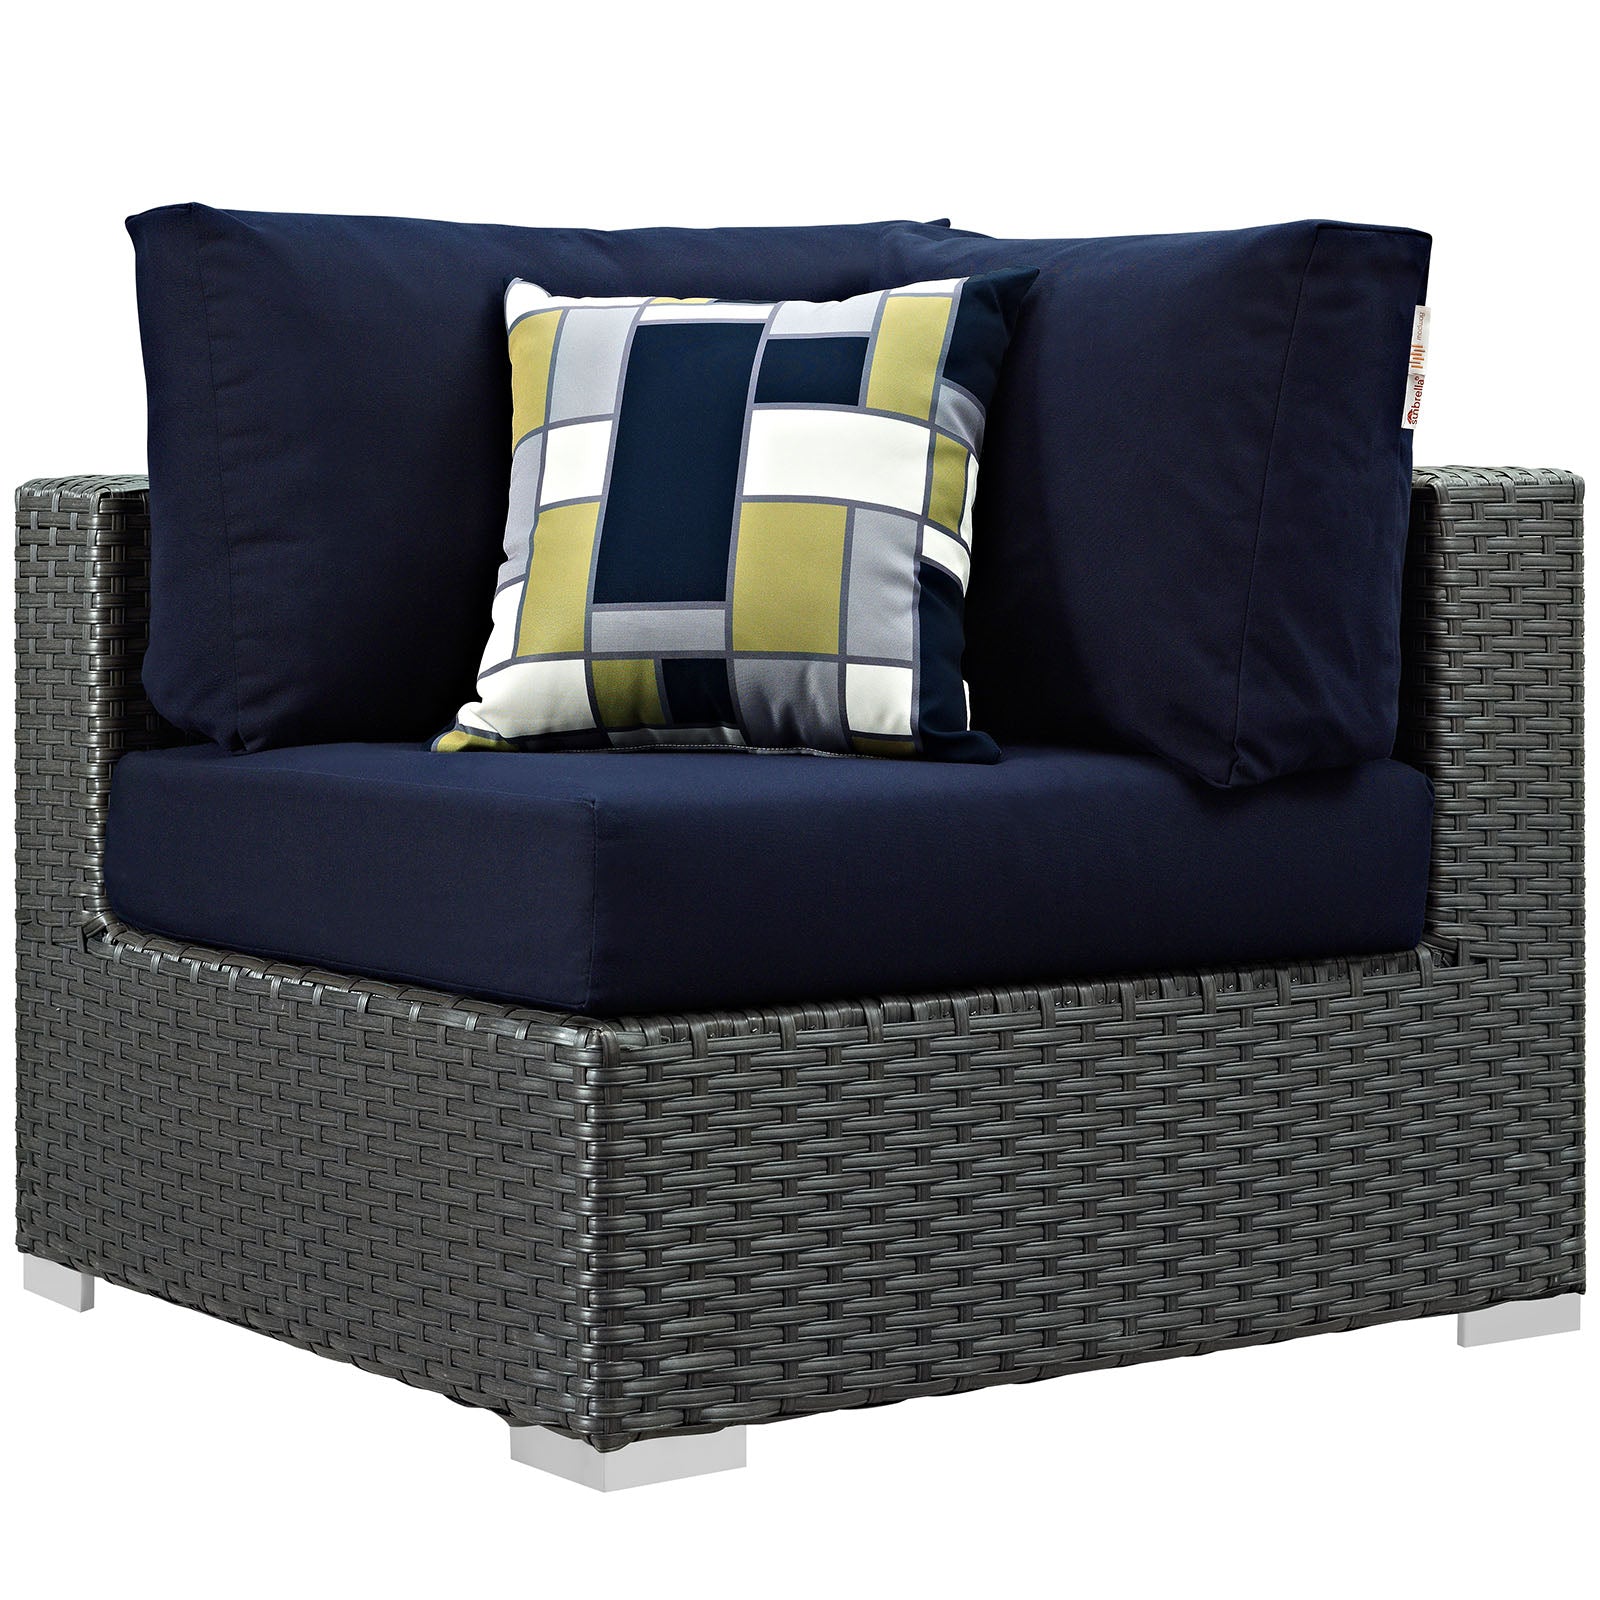 Sojourn 5 Piece Outdoor Patio Sunbrella® Sectional Set - East Shore Modern Home Furnishings